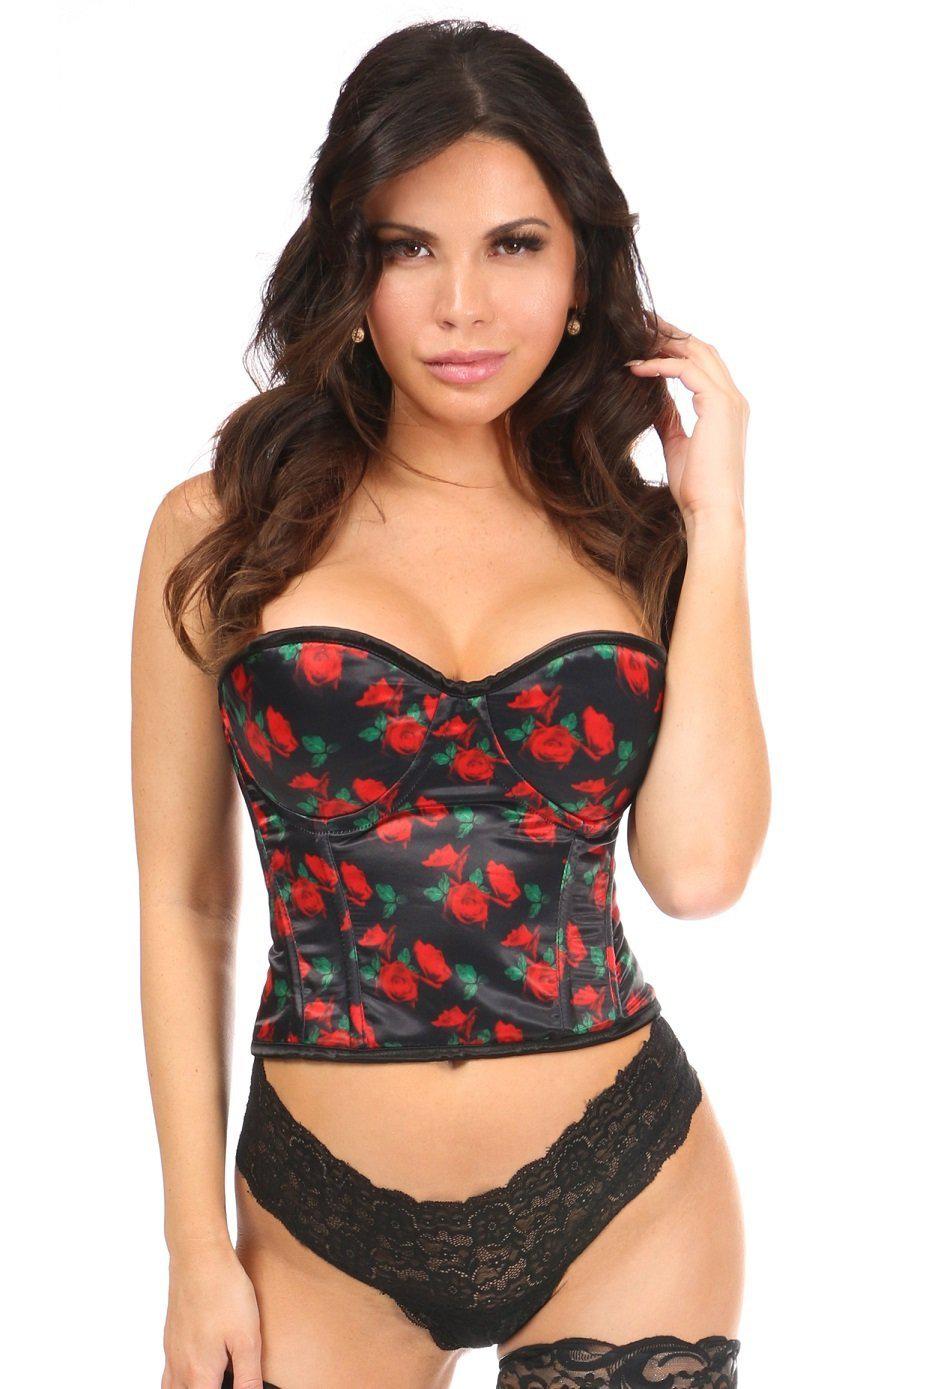 Lavish Rose Floral Underwire Bustier-Bustiers-Daisy Corsets-SEXYSHOES.COM